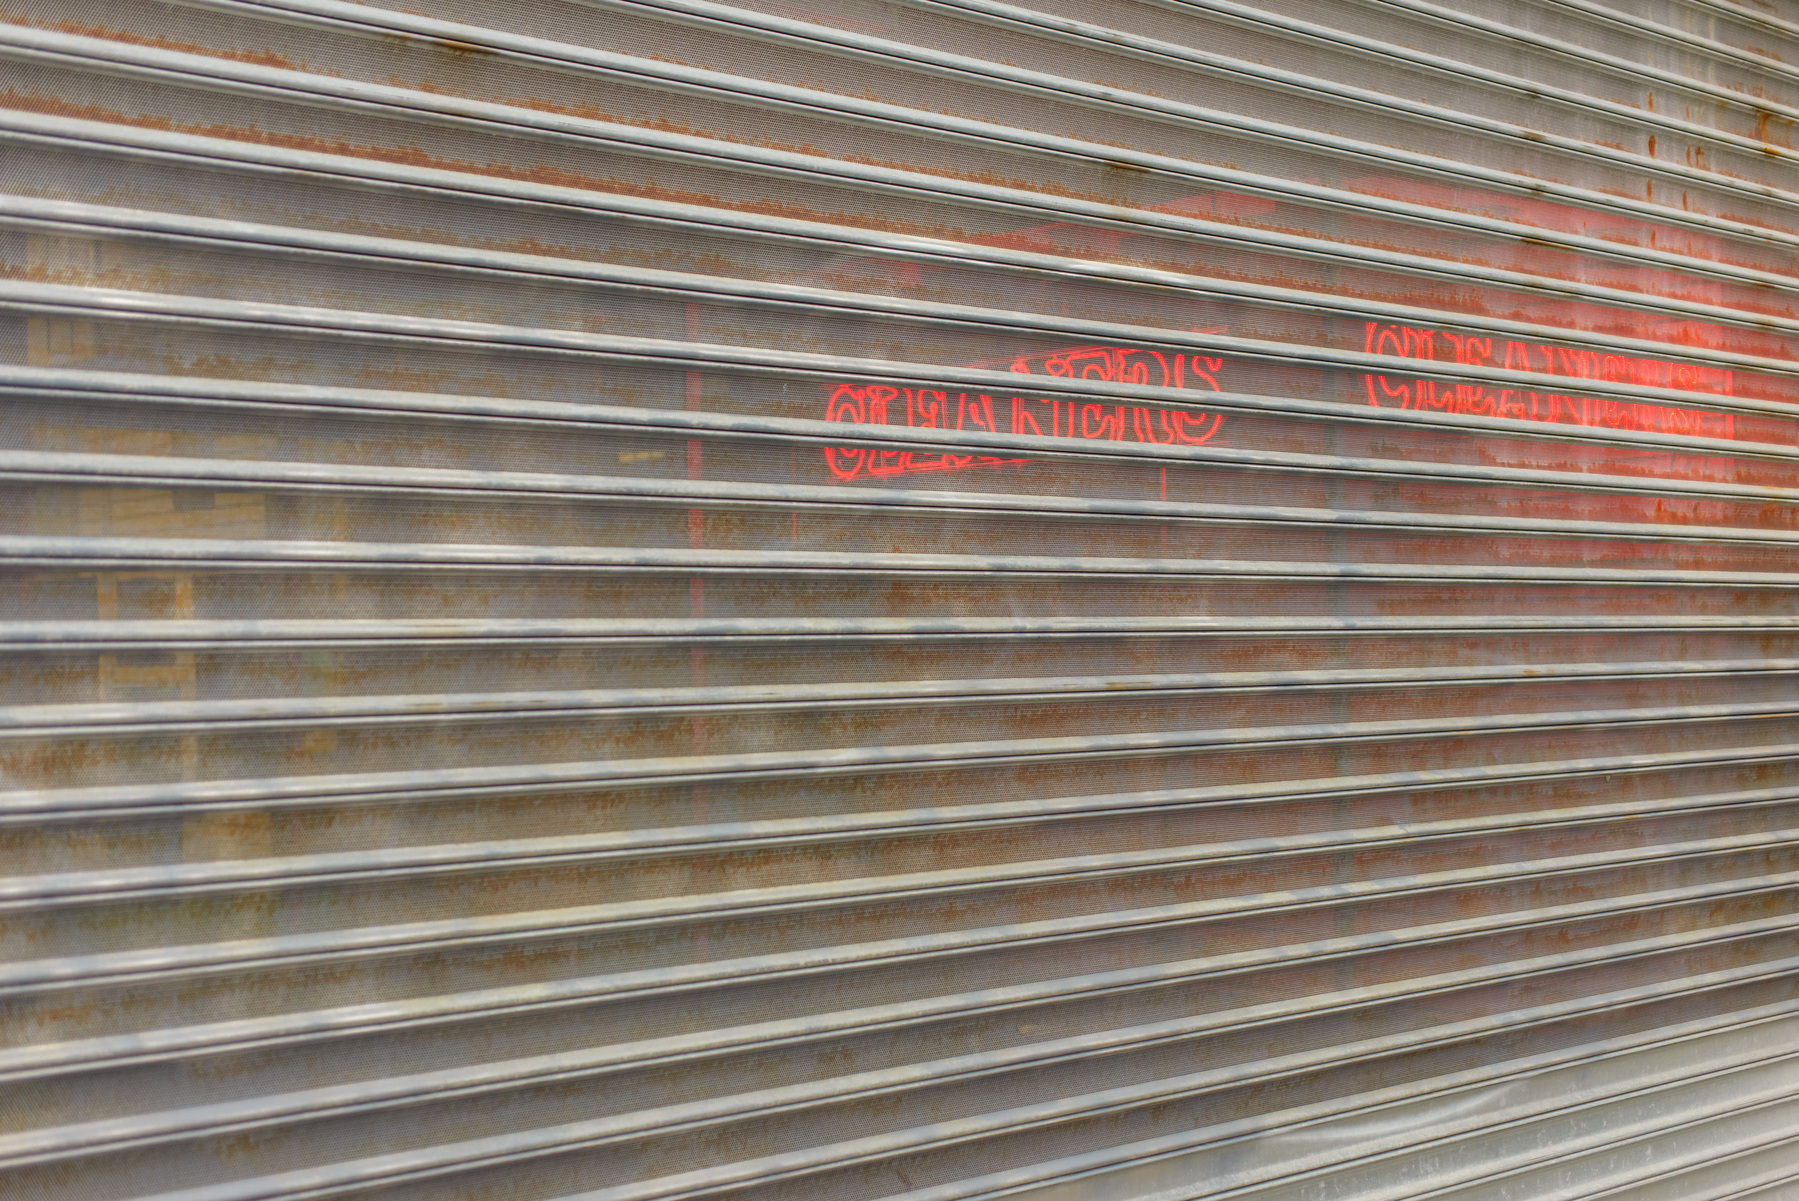 perforated security grille gate with neon “cleaners” signs shining through on the right side